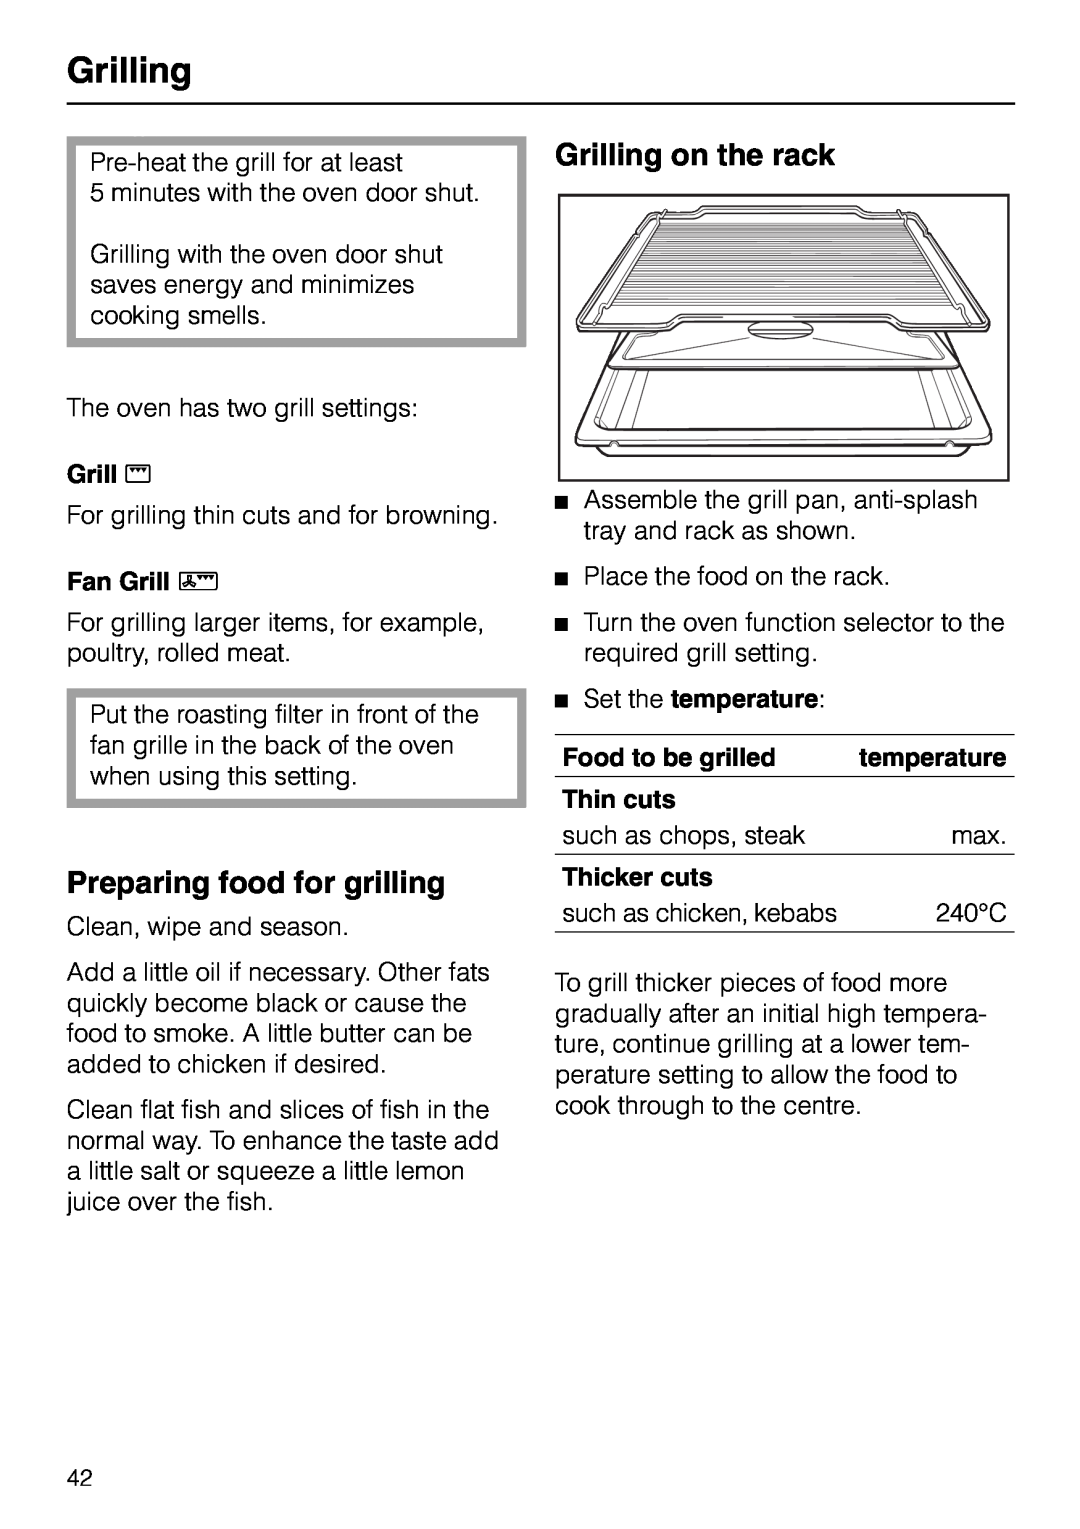 Miele H 320 Preparing food for grilling, Grilling on the rack, Grill n, Fan Grill N, Set the temperature, Thin cuts 